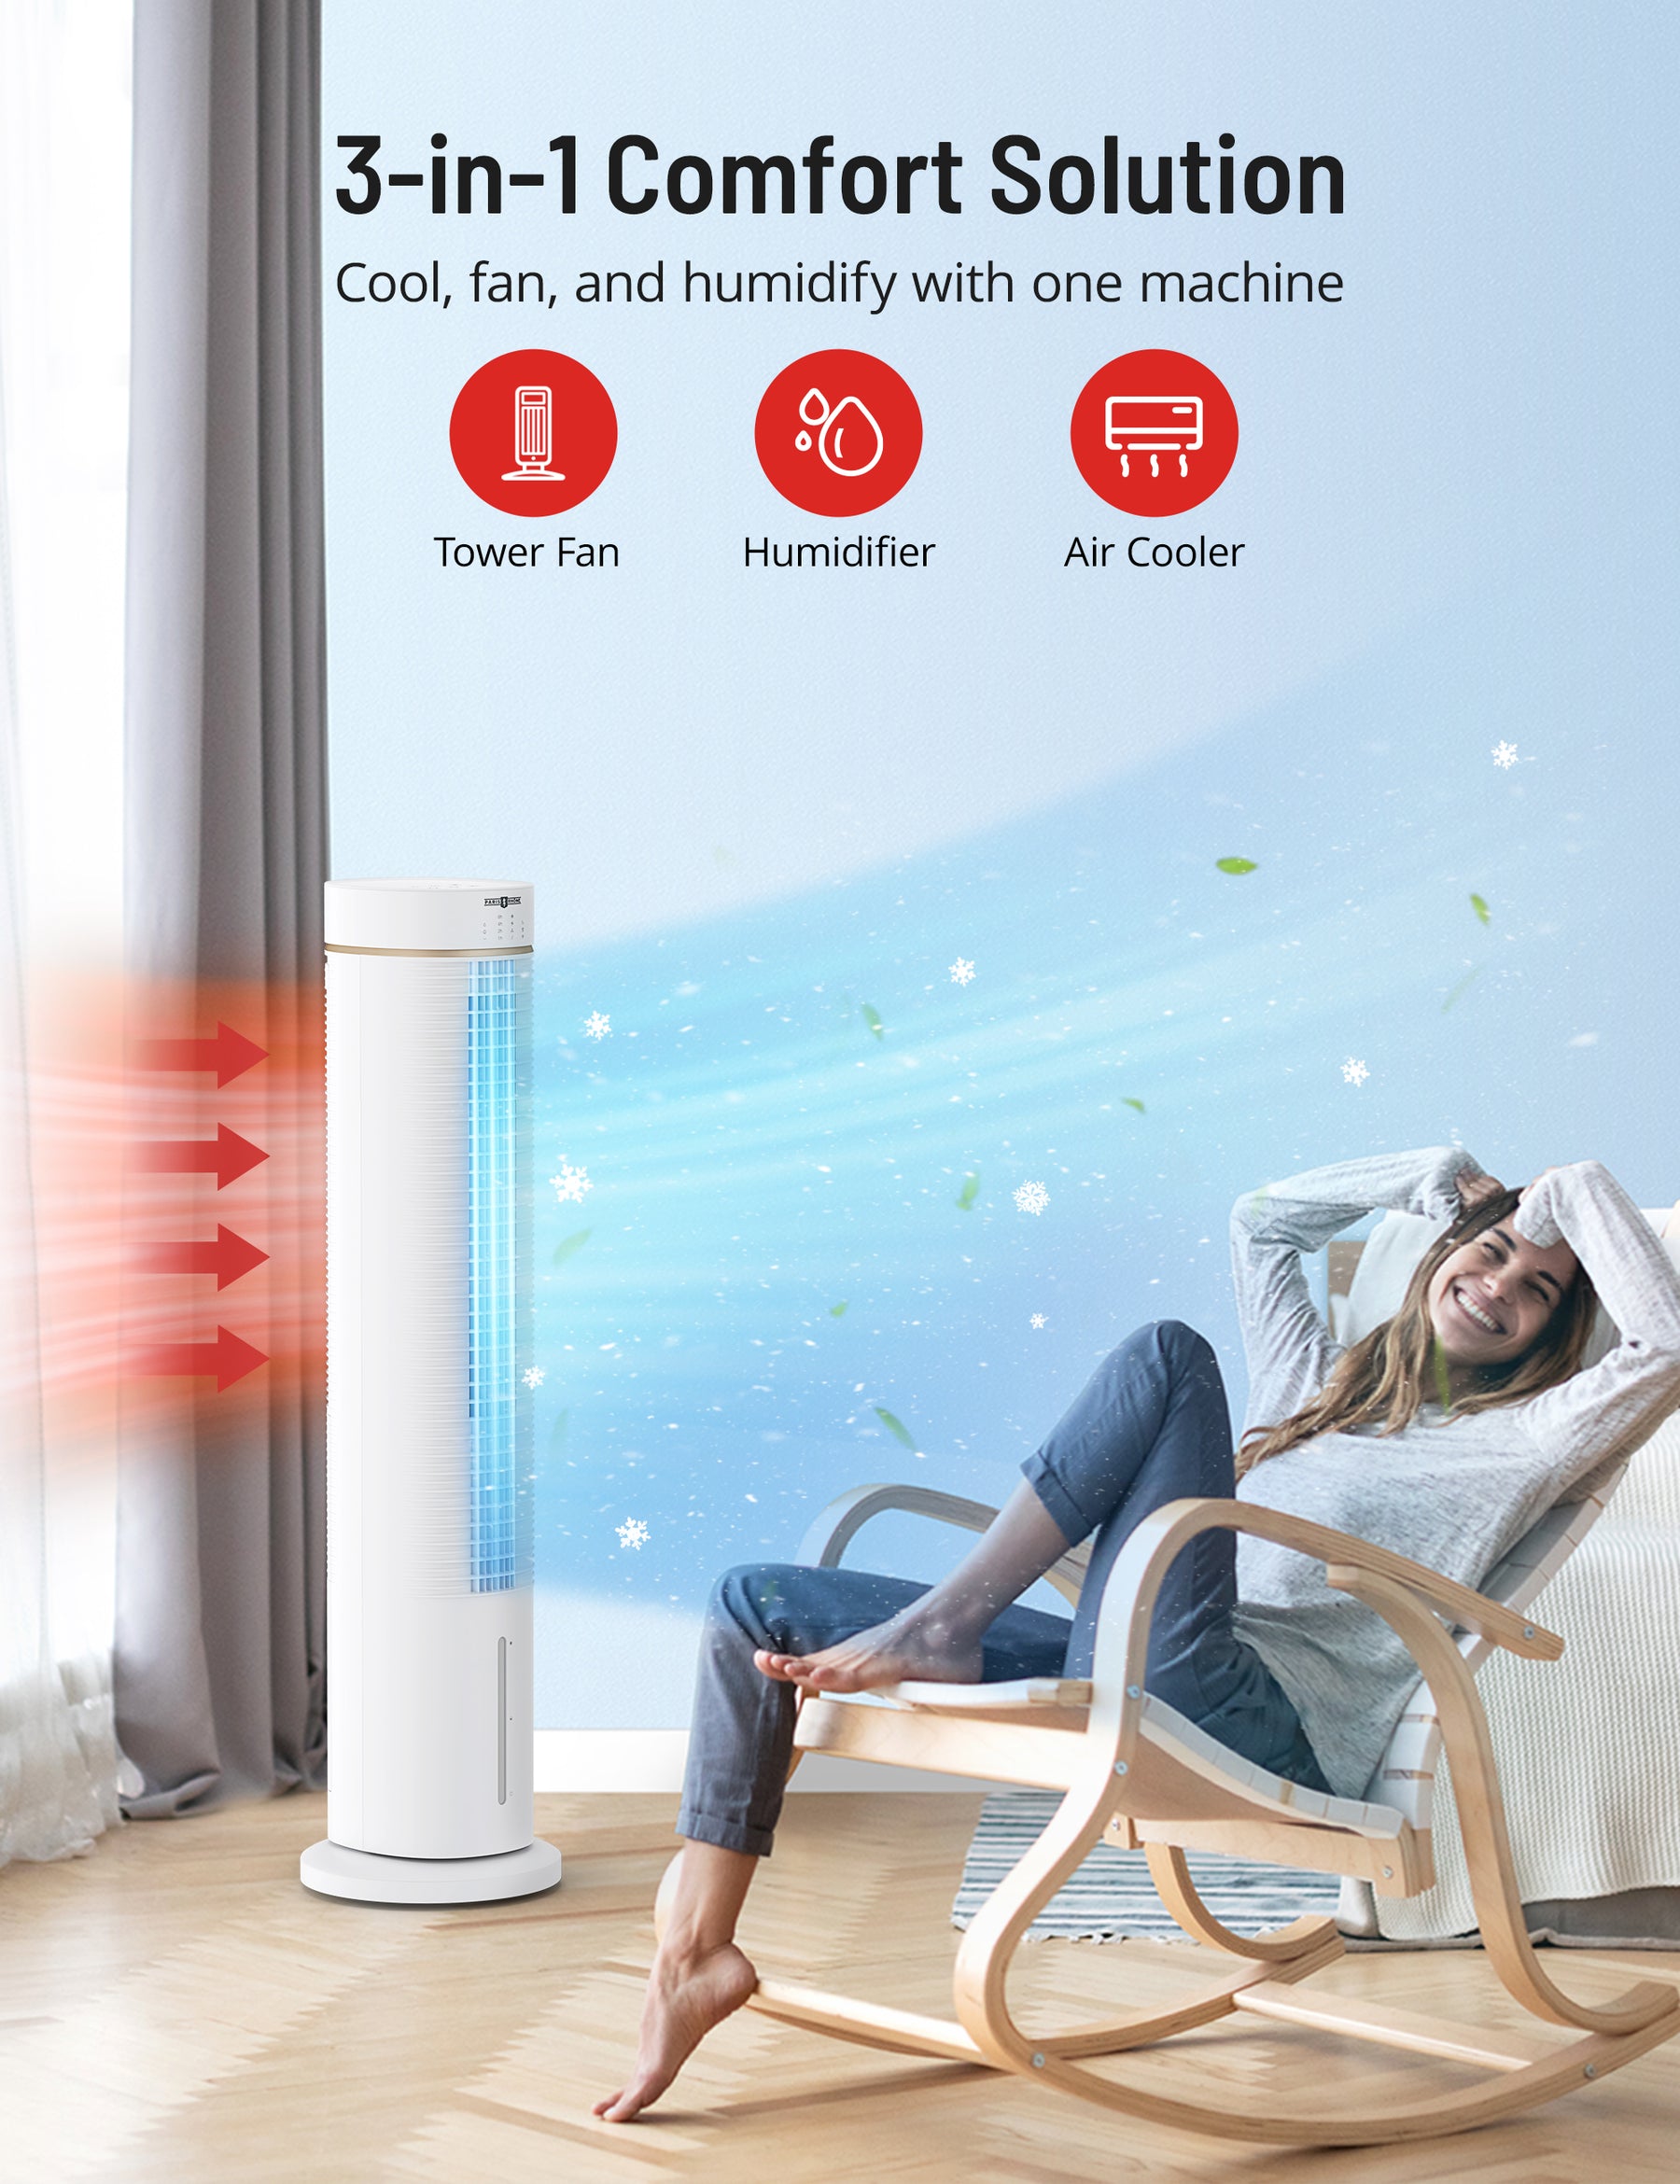 Products - Cool Comfort Solutions